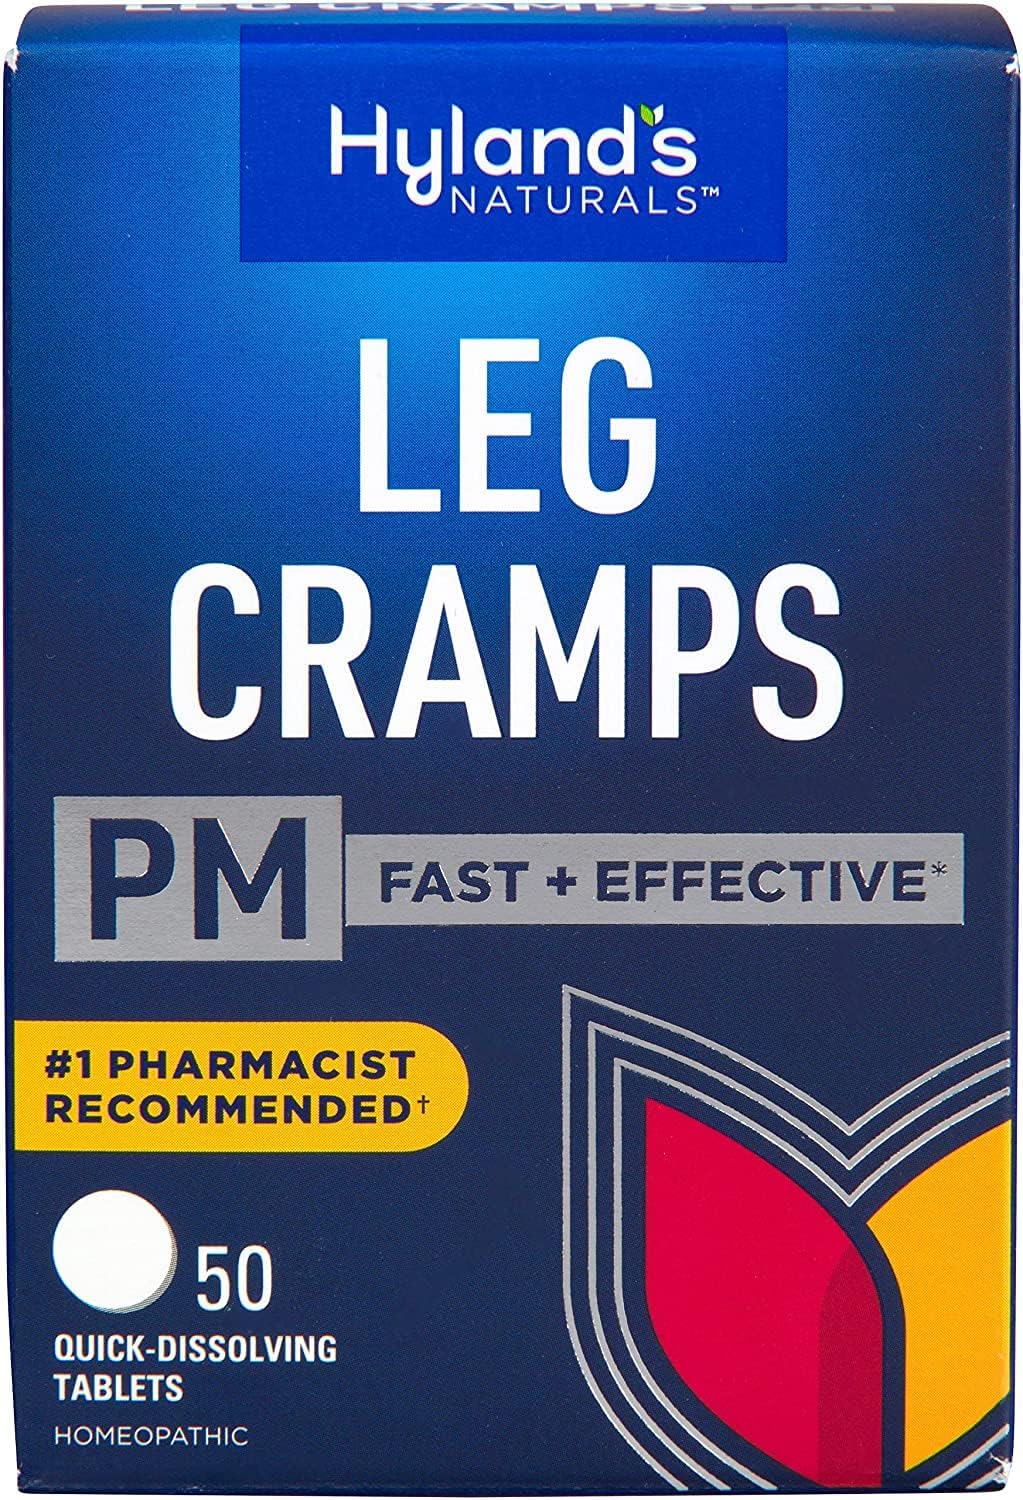 Bundle of Hyland's Naturals Leg Cramps Tablets, 100 Count + Leg Cramps PM Nighttime Formula, Natural Relief of Calf, Foot and Leg Cramps, 50 Count : Health & Household